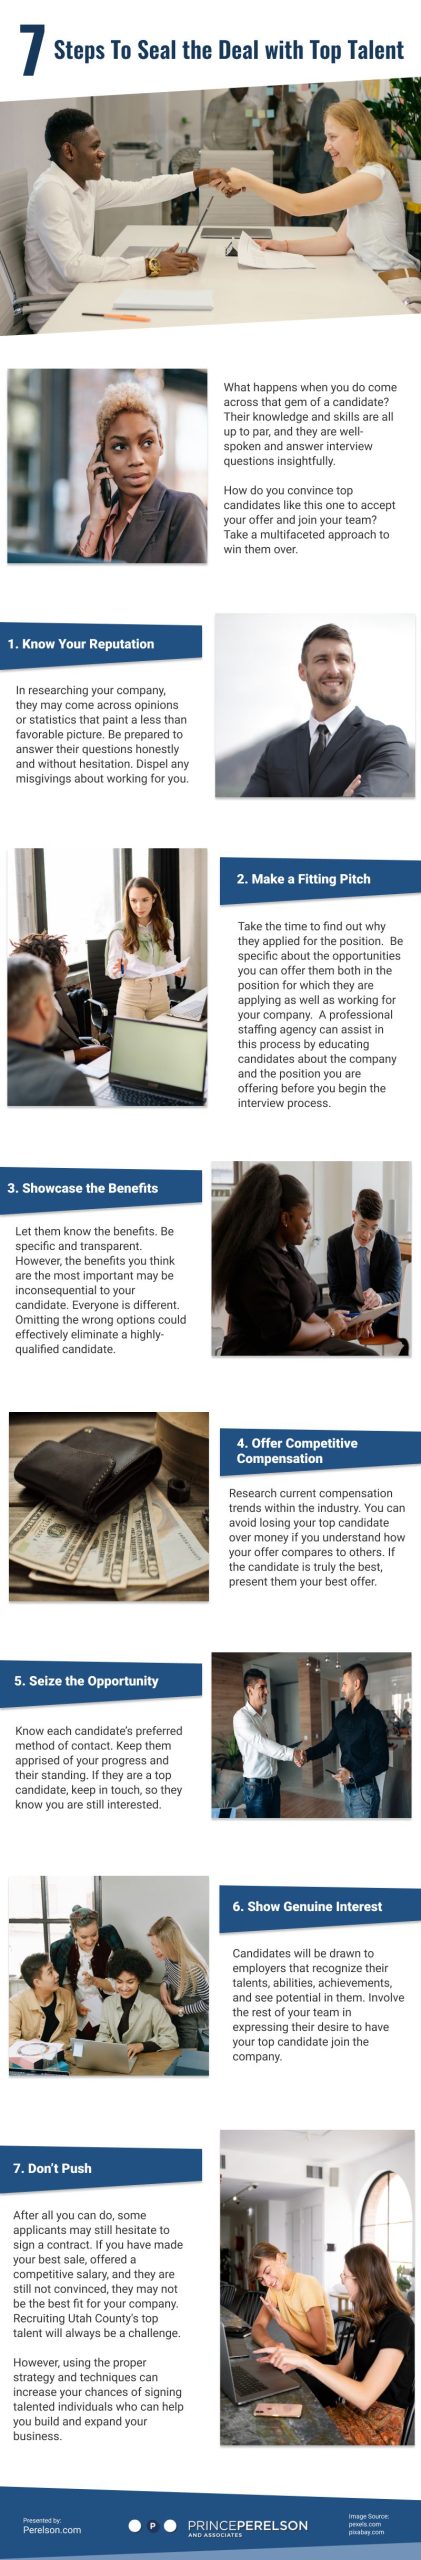 7 Steps to Seal the Deal with Top Talent Infographic